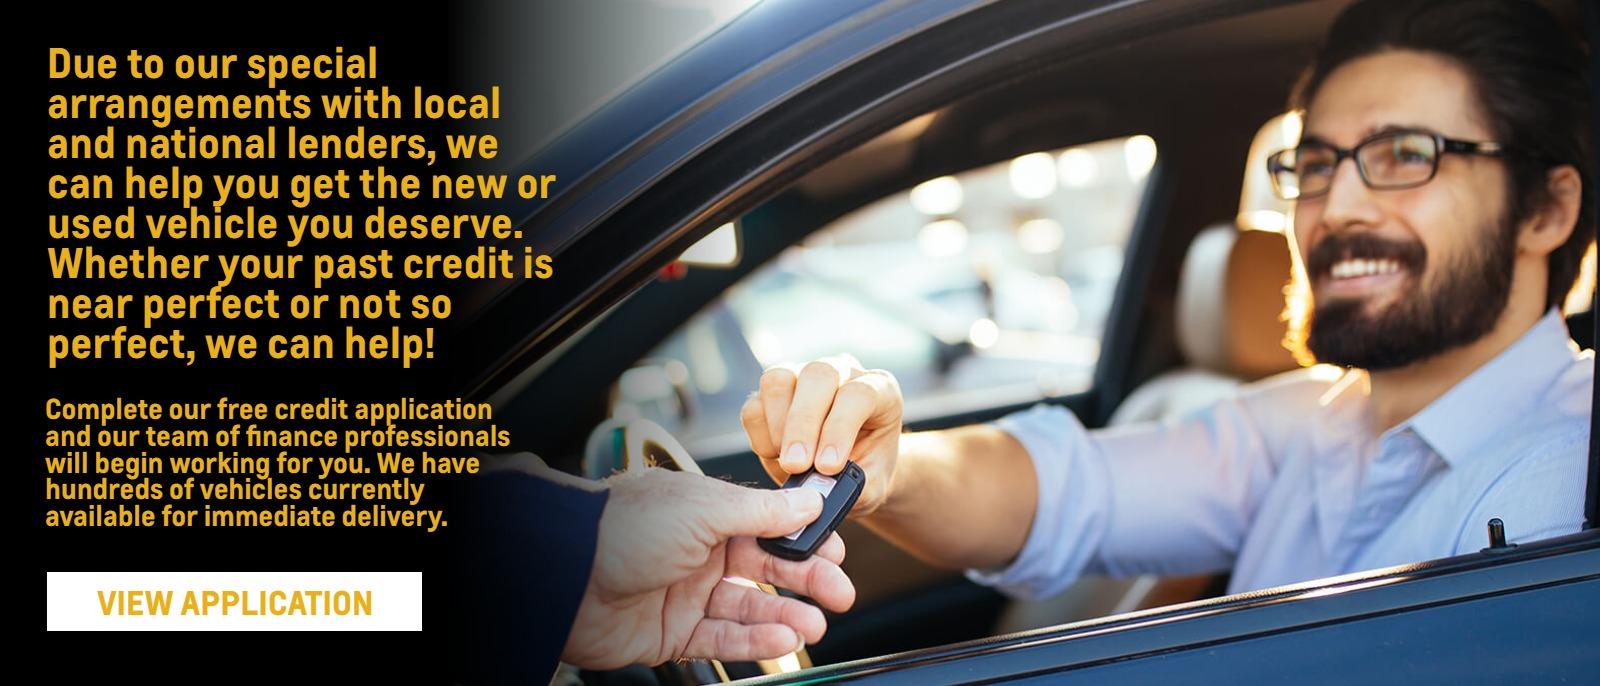 Due to our special arrangements with local and national lenders, we can help you get the new or used vehicle you deserve. Whether your past credit is near perfect or not so perfect, we can help!

Complete our free credit application and our team of finance professionals will begin working for you. We have hundreds of vehicles currently available for immediate delivery.